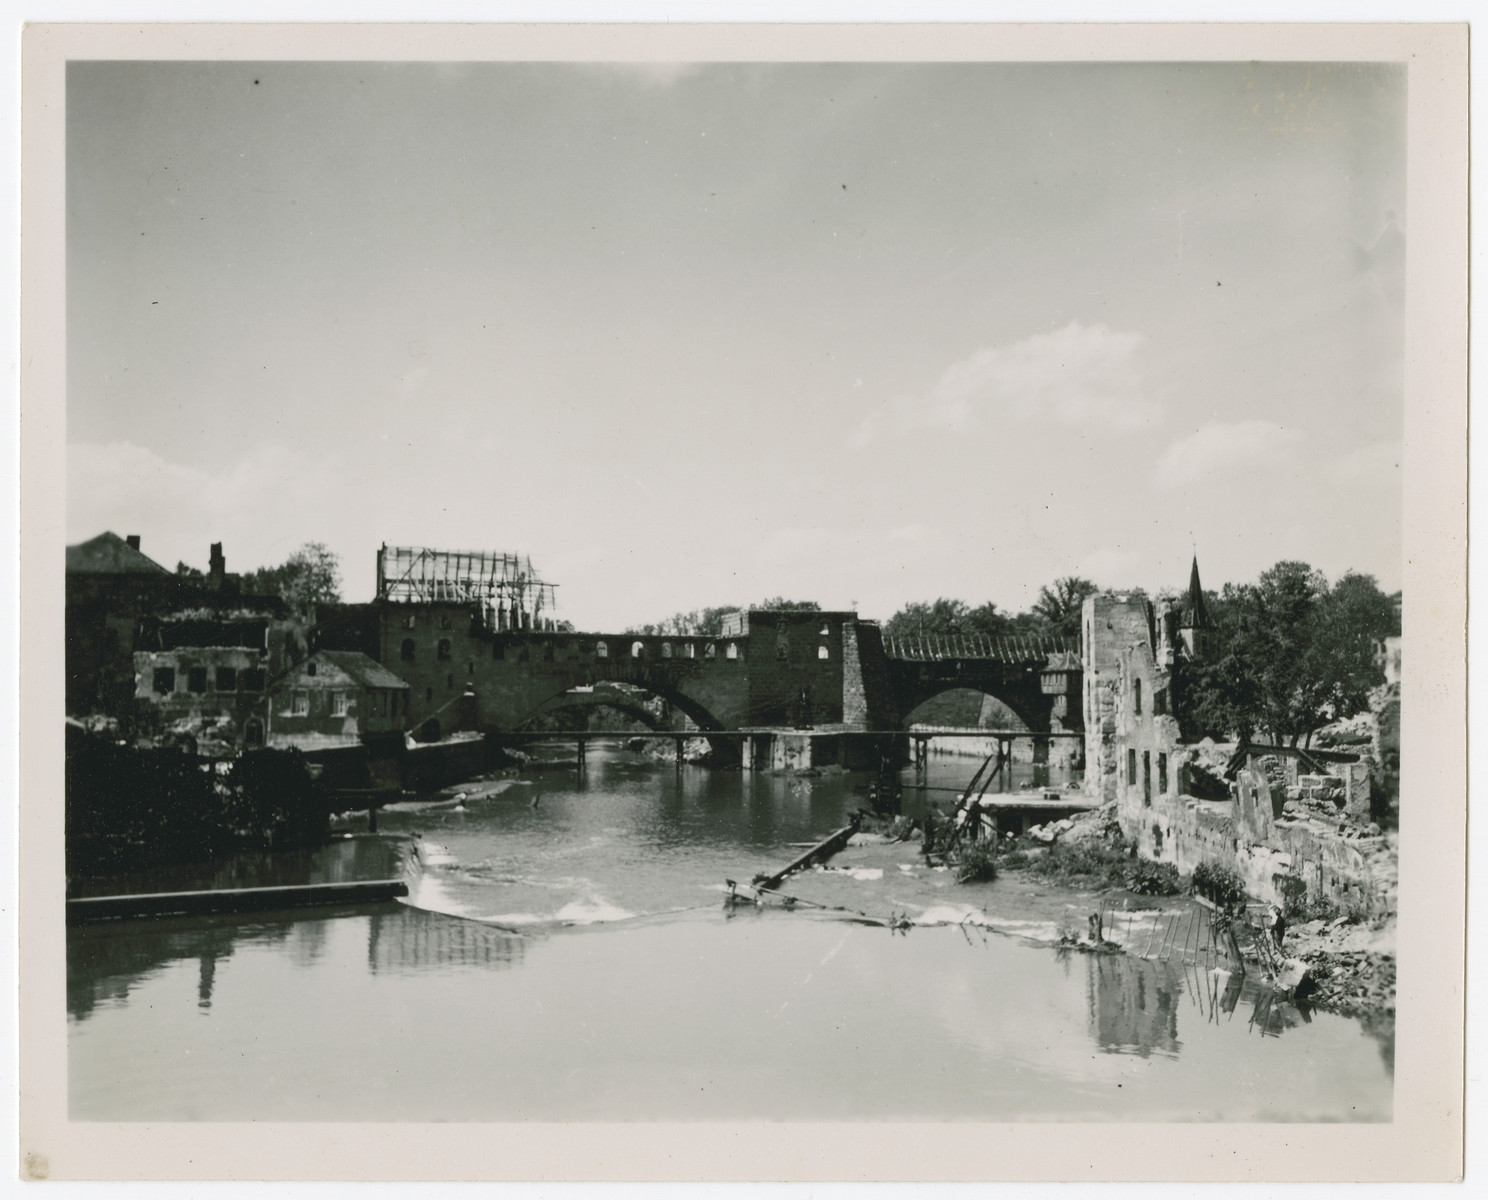 View of bombed out bridge, possibly in Nuremberg.